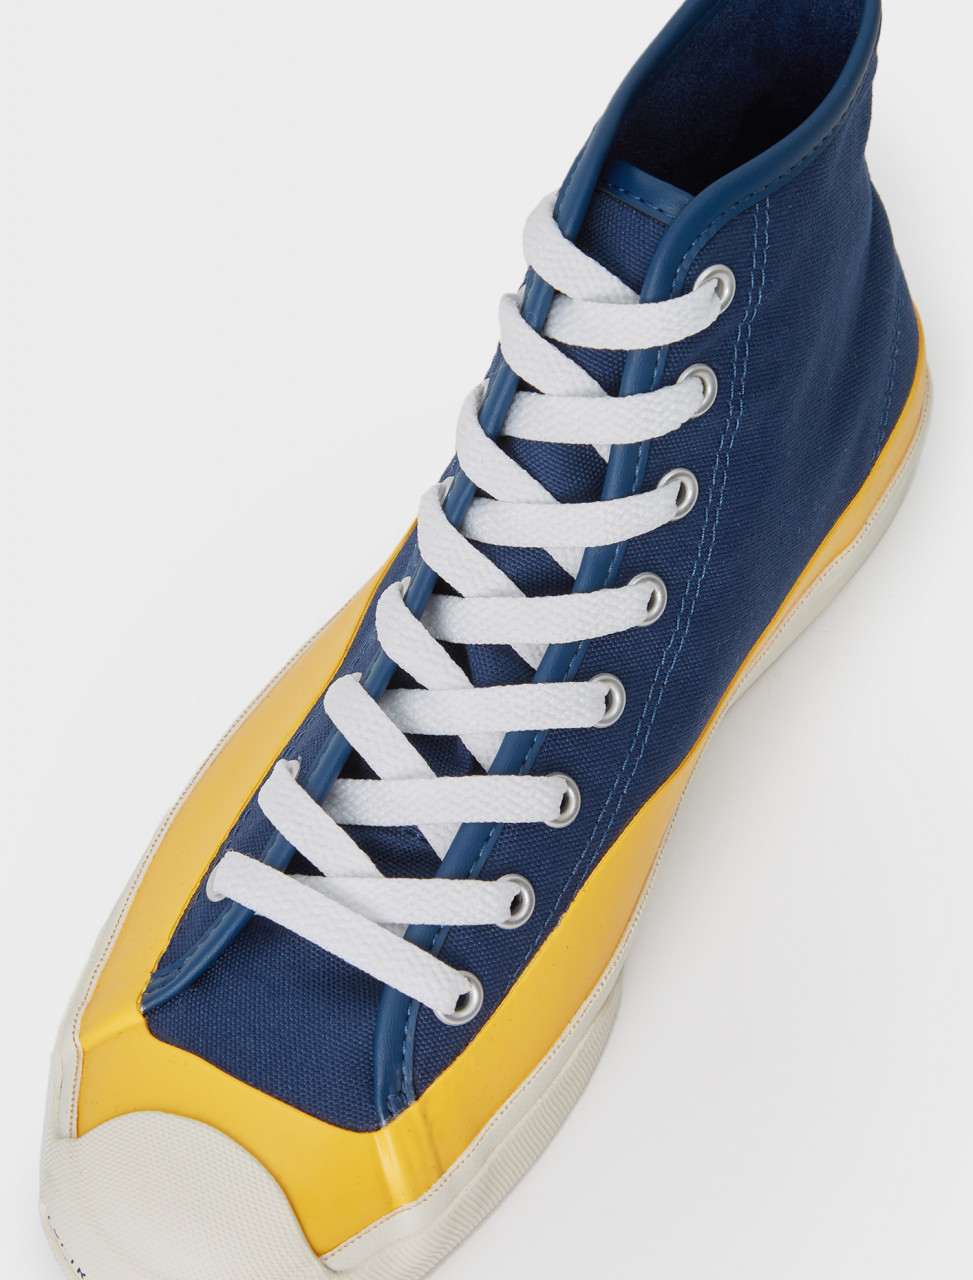 Converse x Pop Trading Company Jack Purcell High Sneaker | Voo Store ...